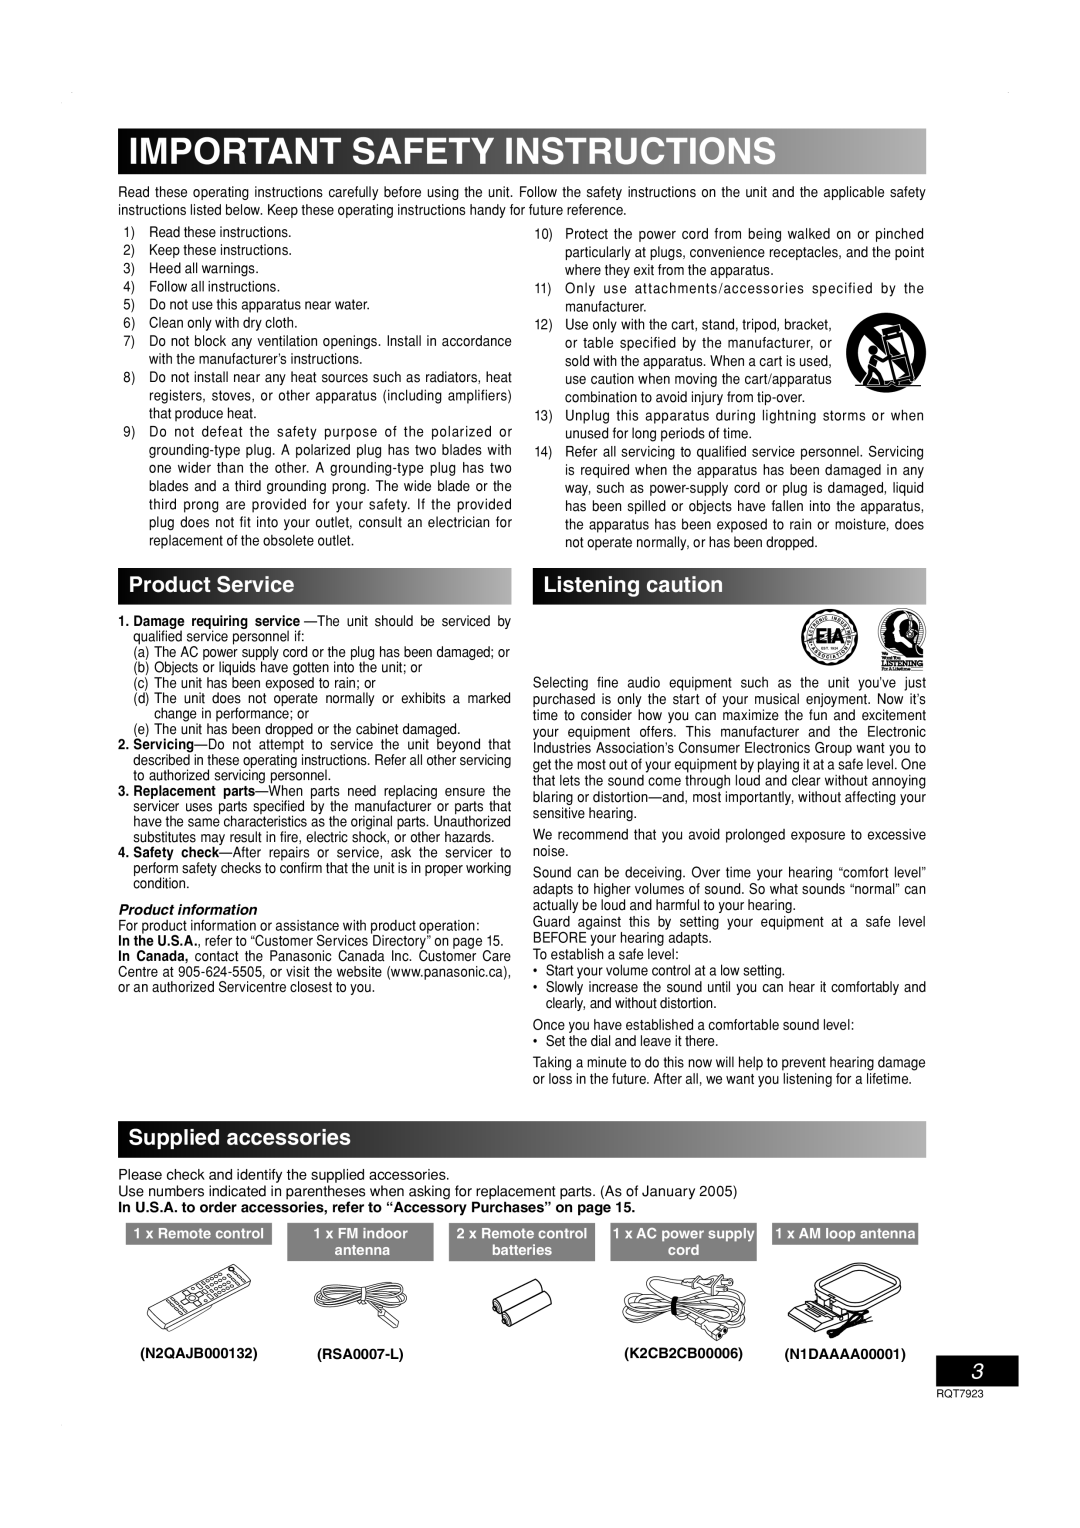 Panasonic SC-PM313 Product Service, Listening caution, Supplied accessories, Important Safety Instructions, cord 